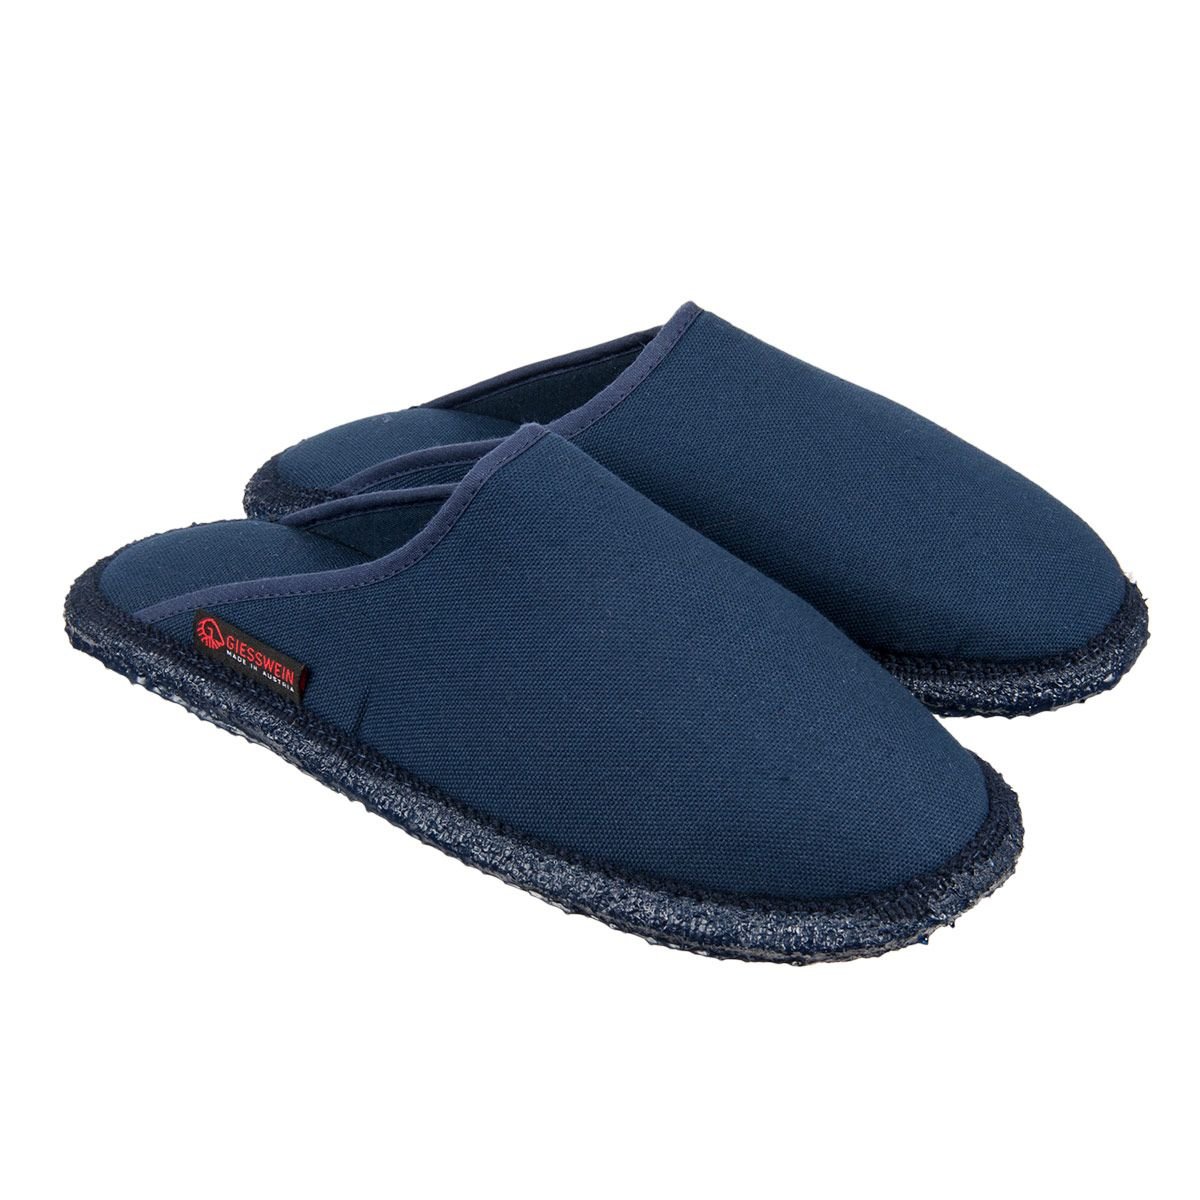 GIESSWEIN adults slippers style Phoenix --> Online Hatshop for hats, caps, headbands, gloves and